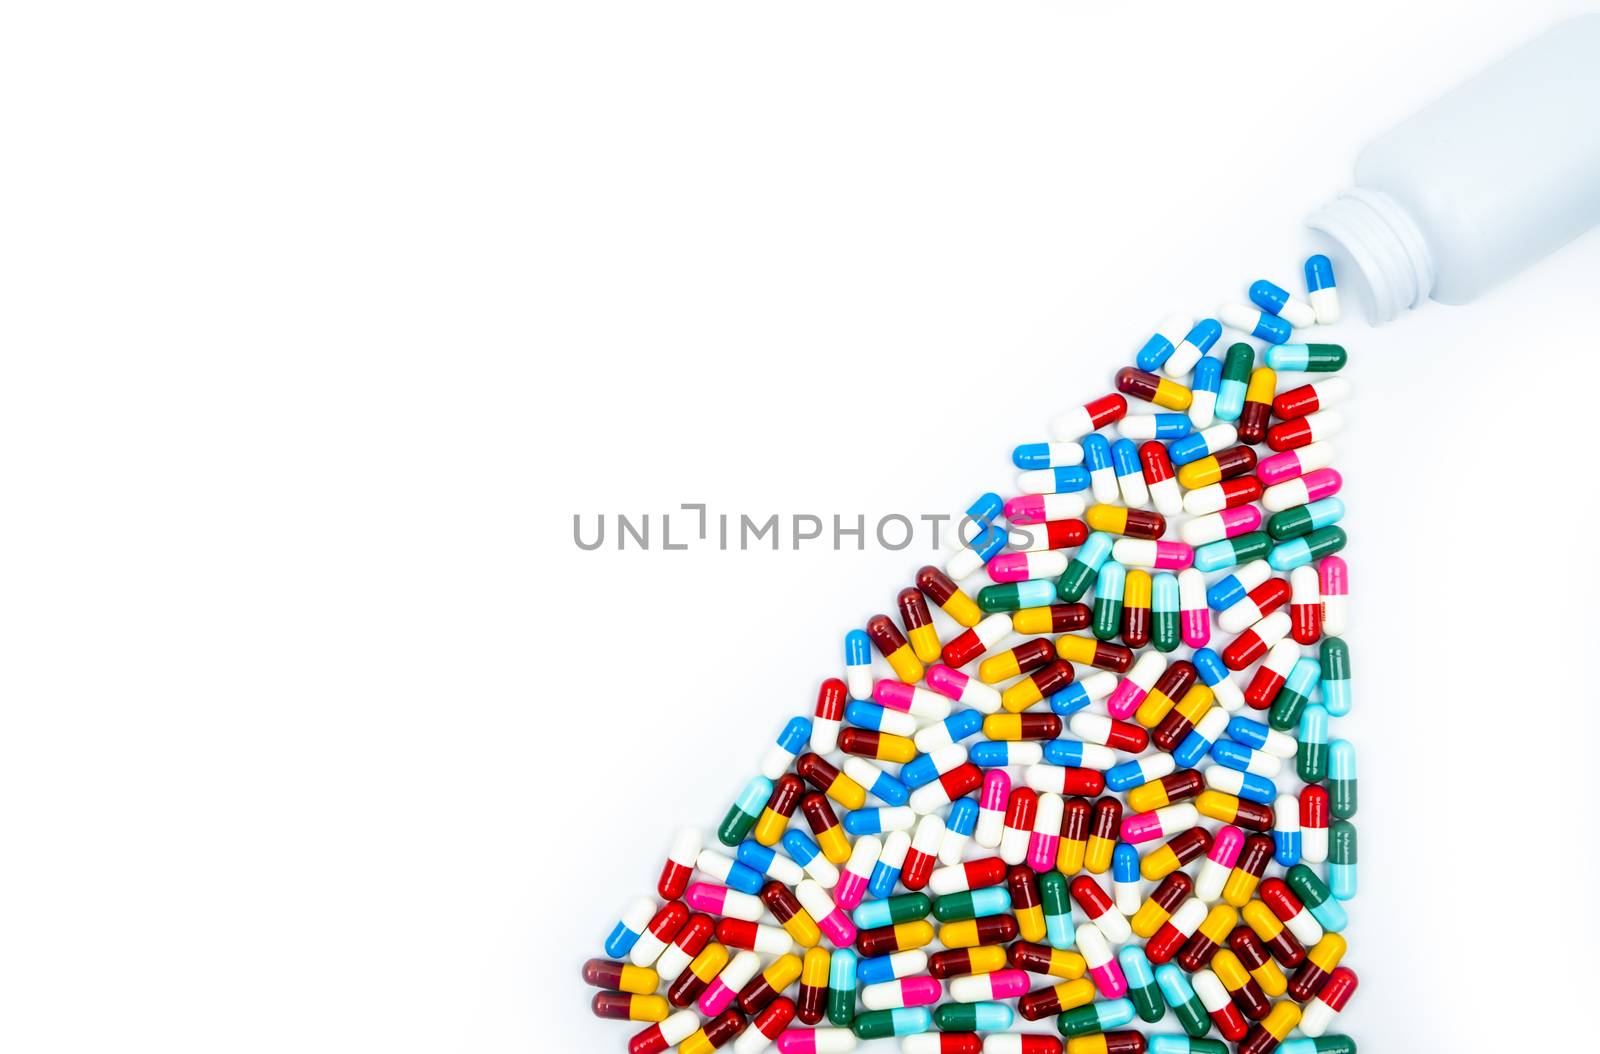 Antibiotic capsules spilling out of pill bottle on white background with copy space, just add your own text. Drug resistance concept. Antibiotics drug use with reasonable and global healthcare concept. Pharmaceutical industry. Pharmacy background. by Fahroni